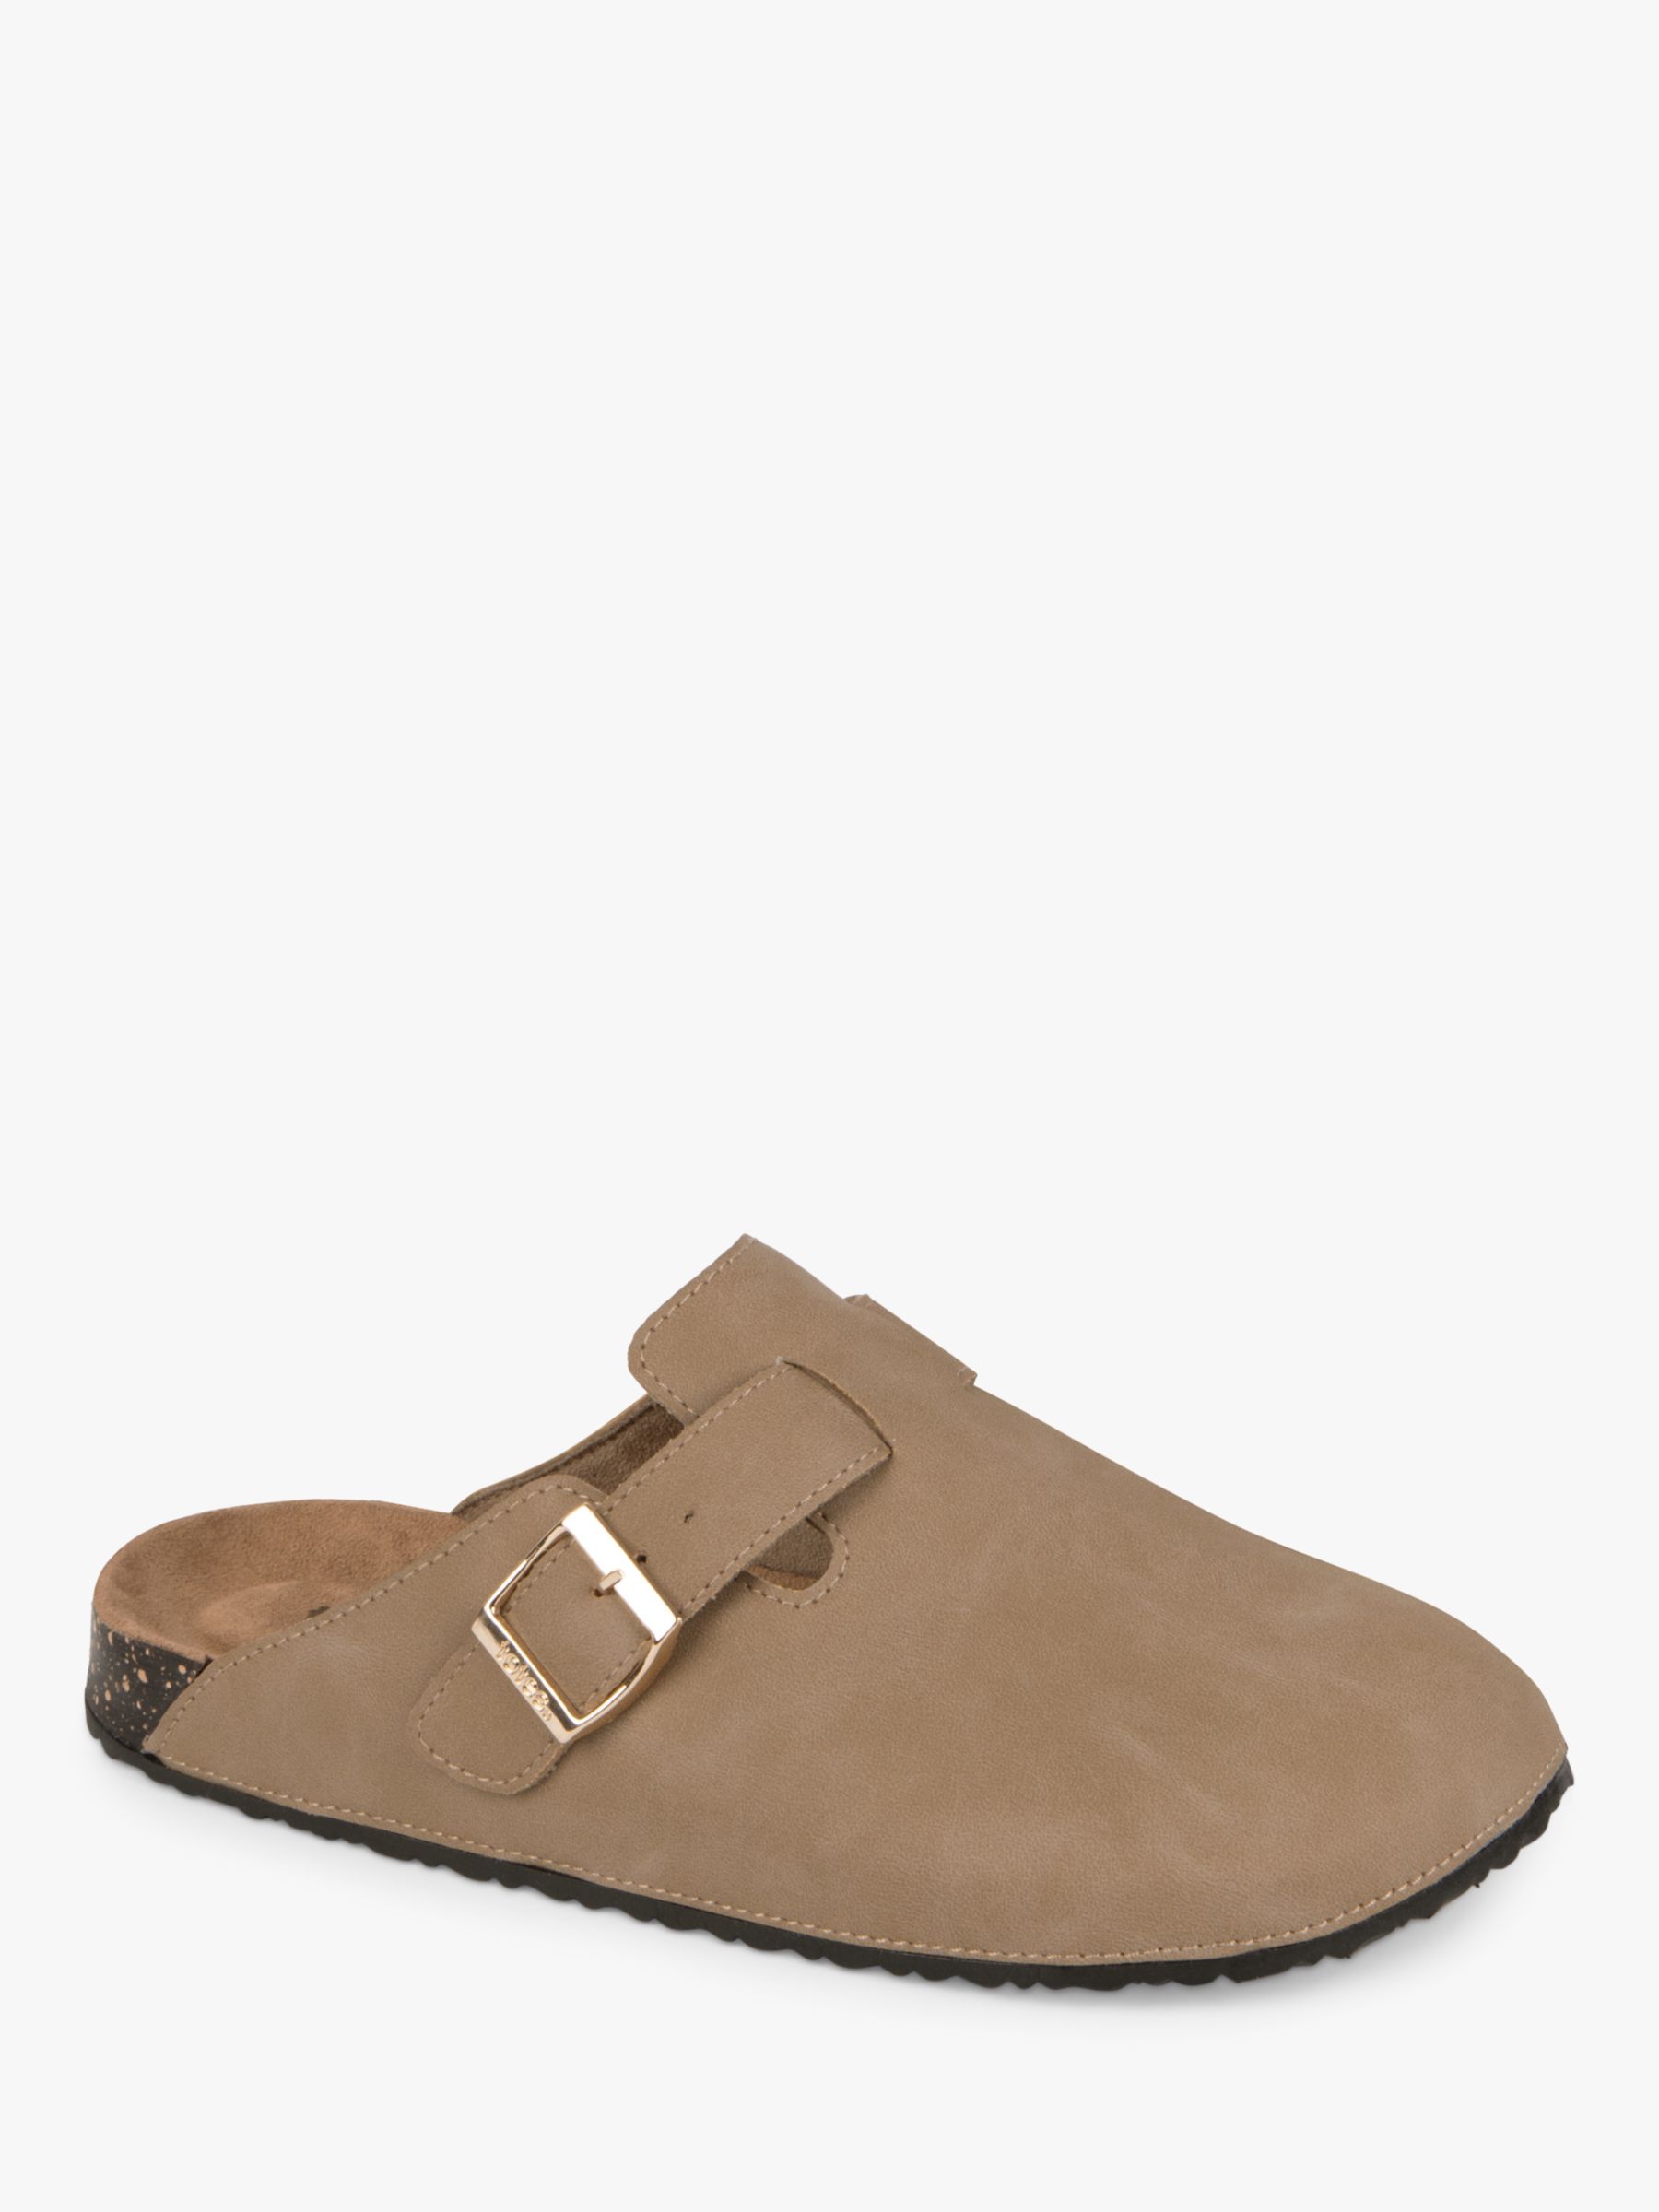 totes Buckle Clogs, Taupe, 4